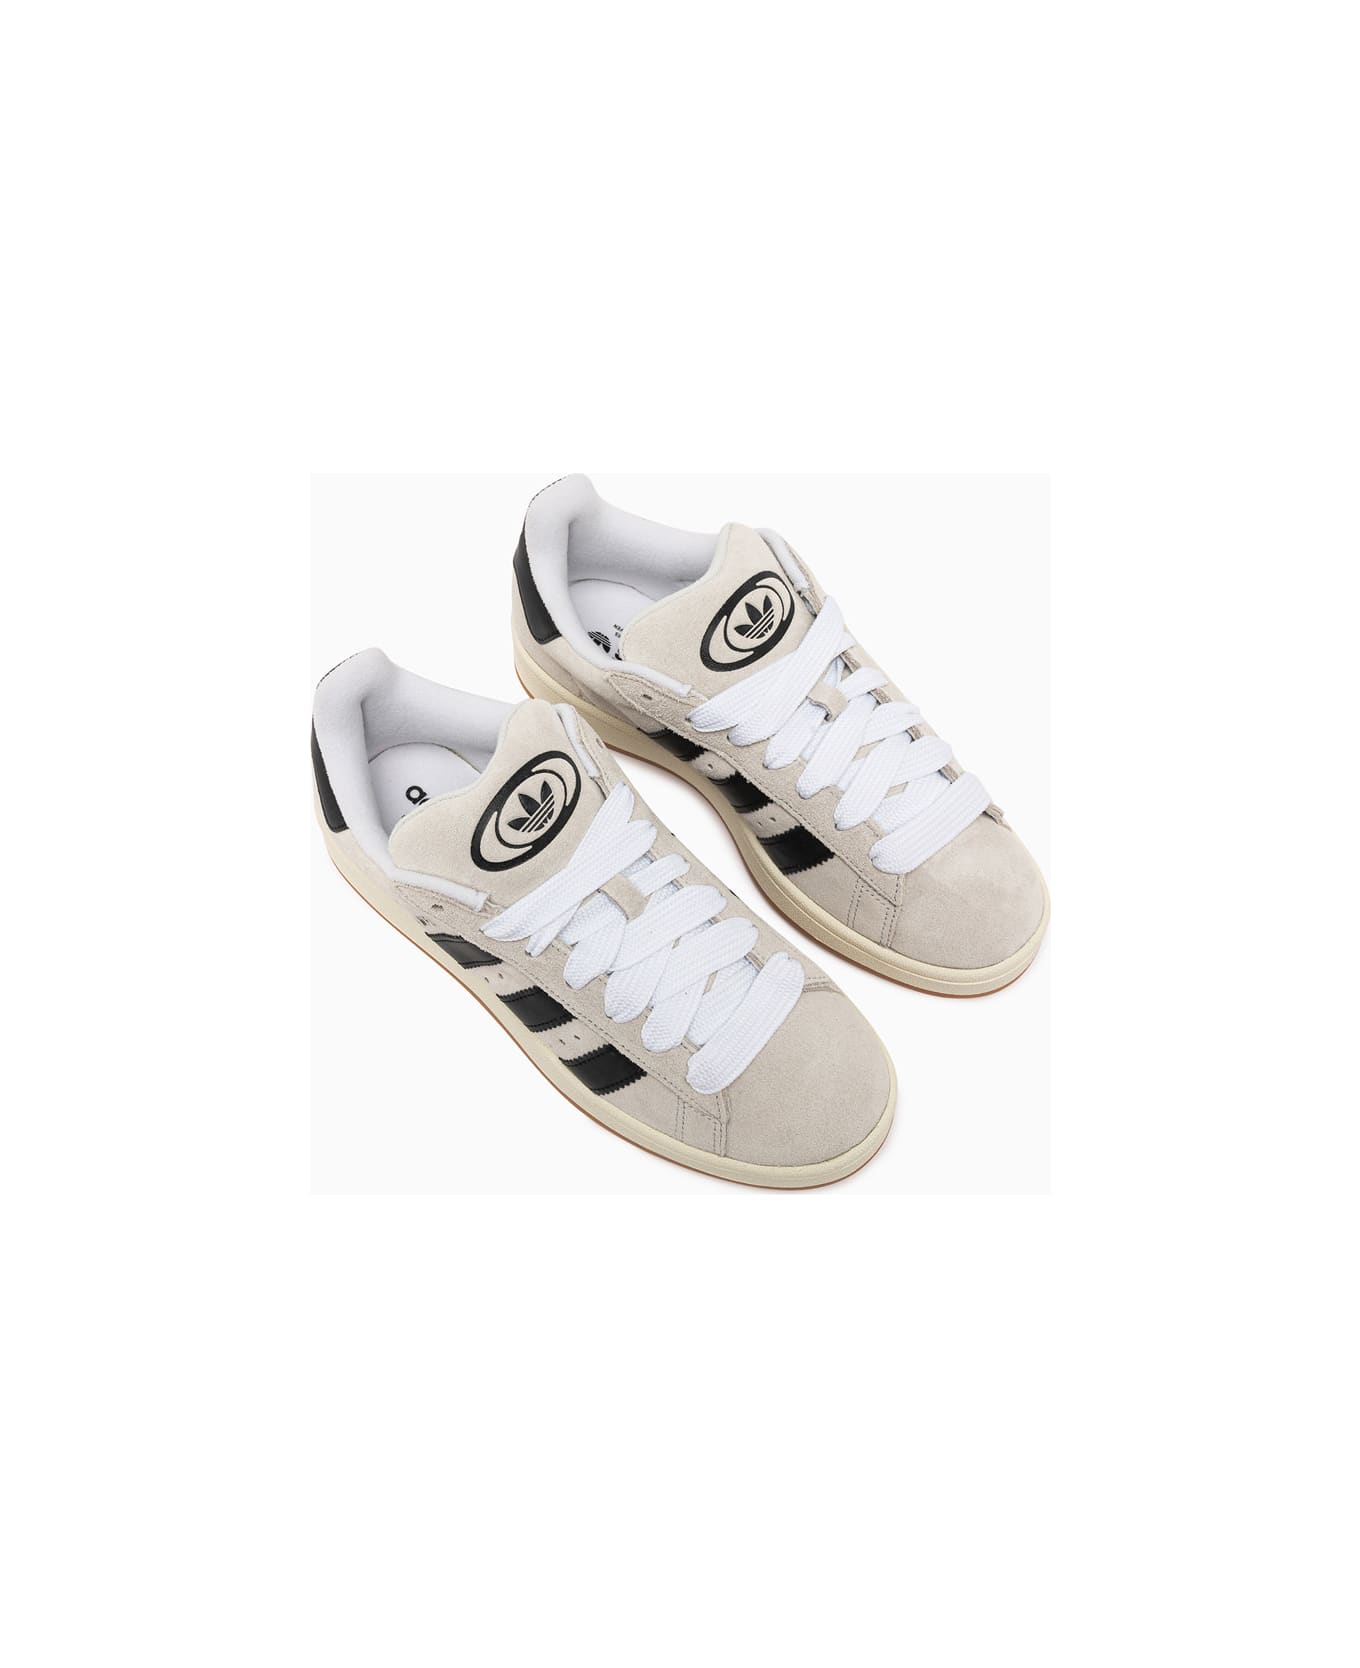 Adidas Originals Campus 00s (w) Sneakers Gy0042 - White スニーカー